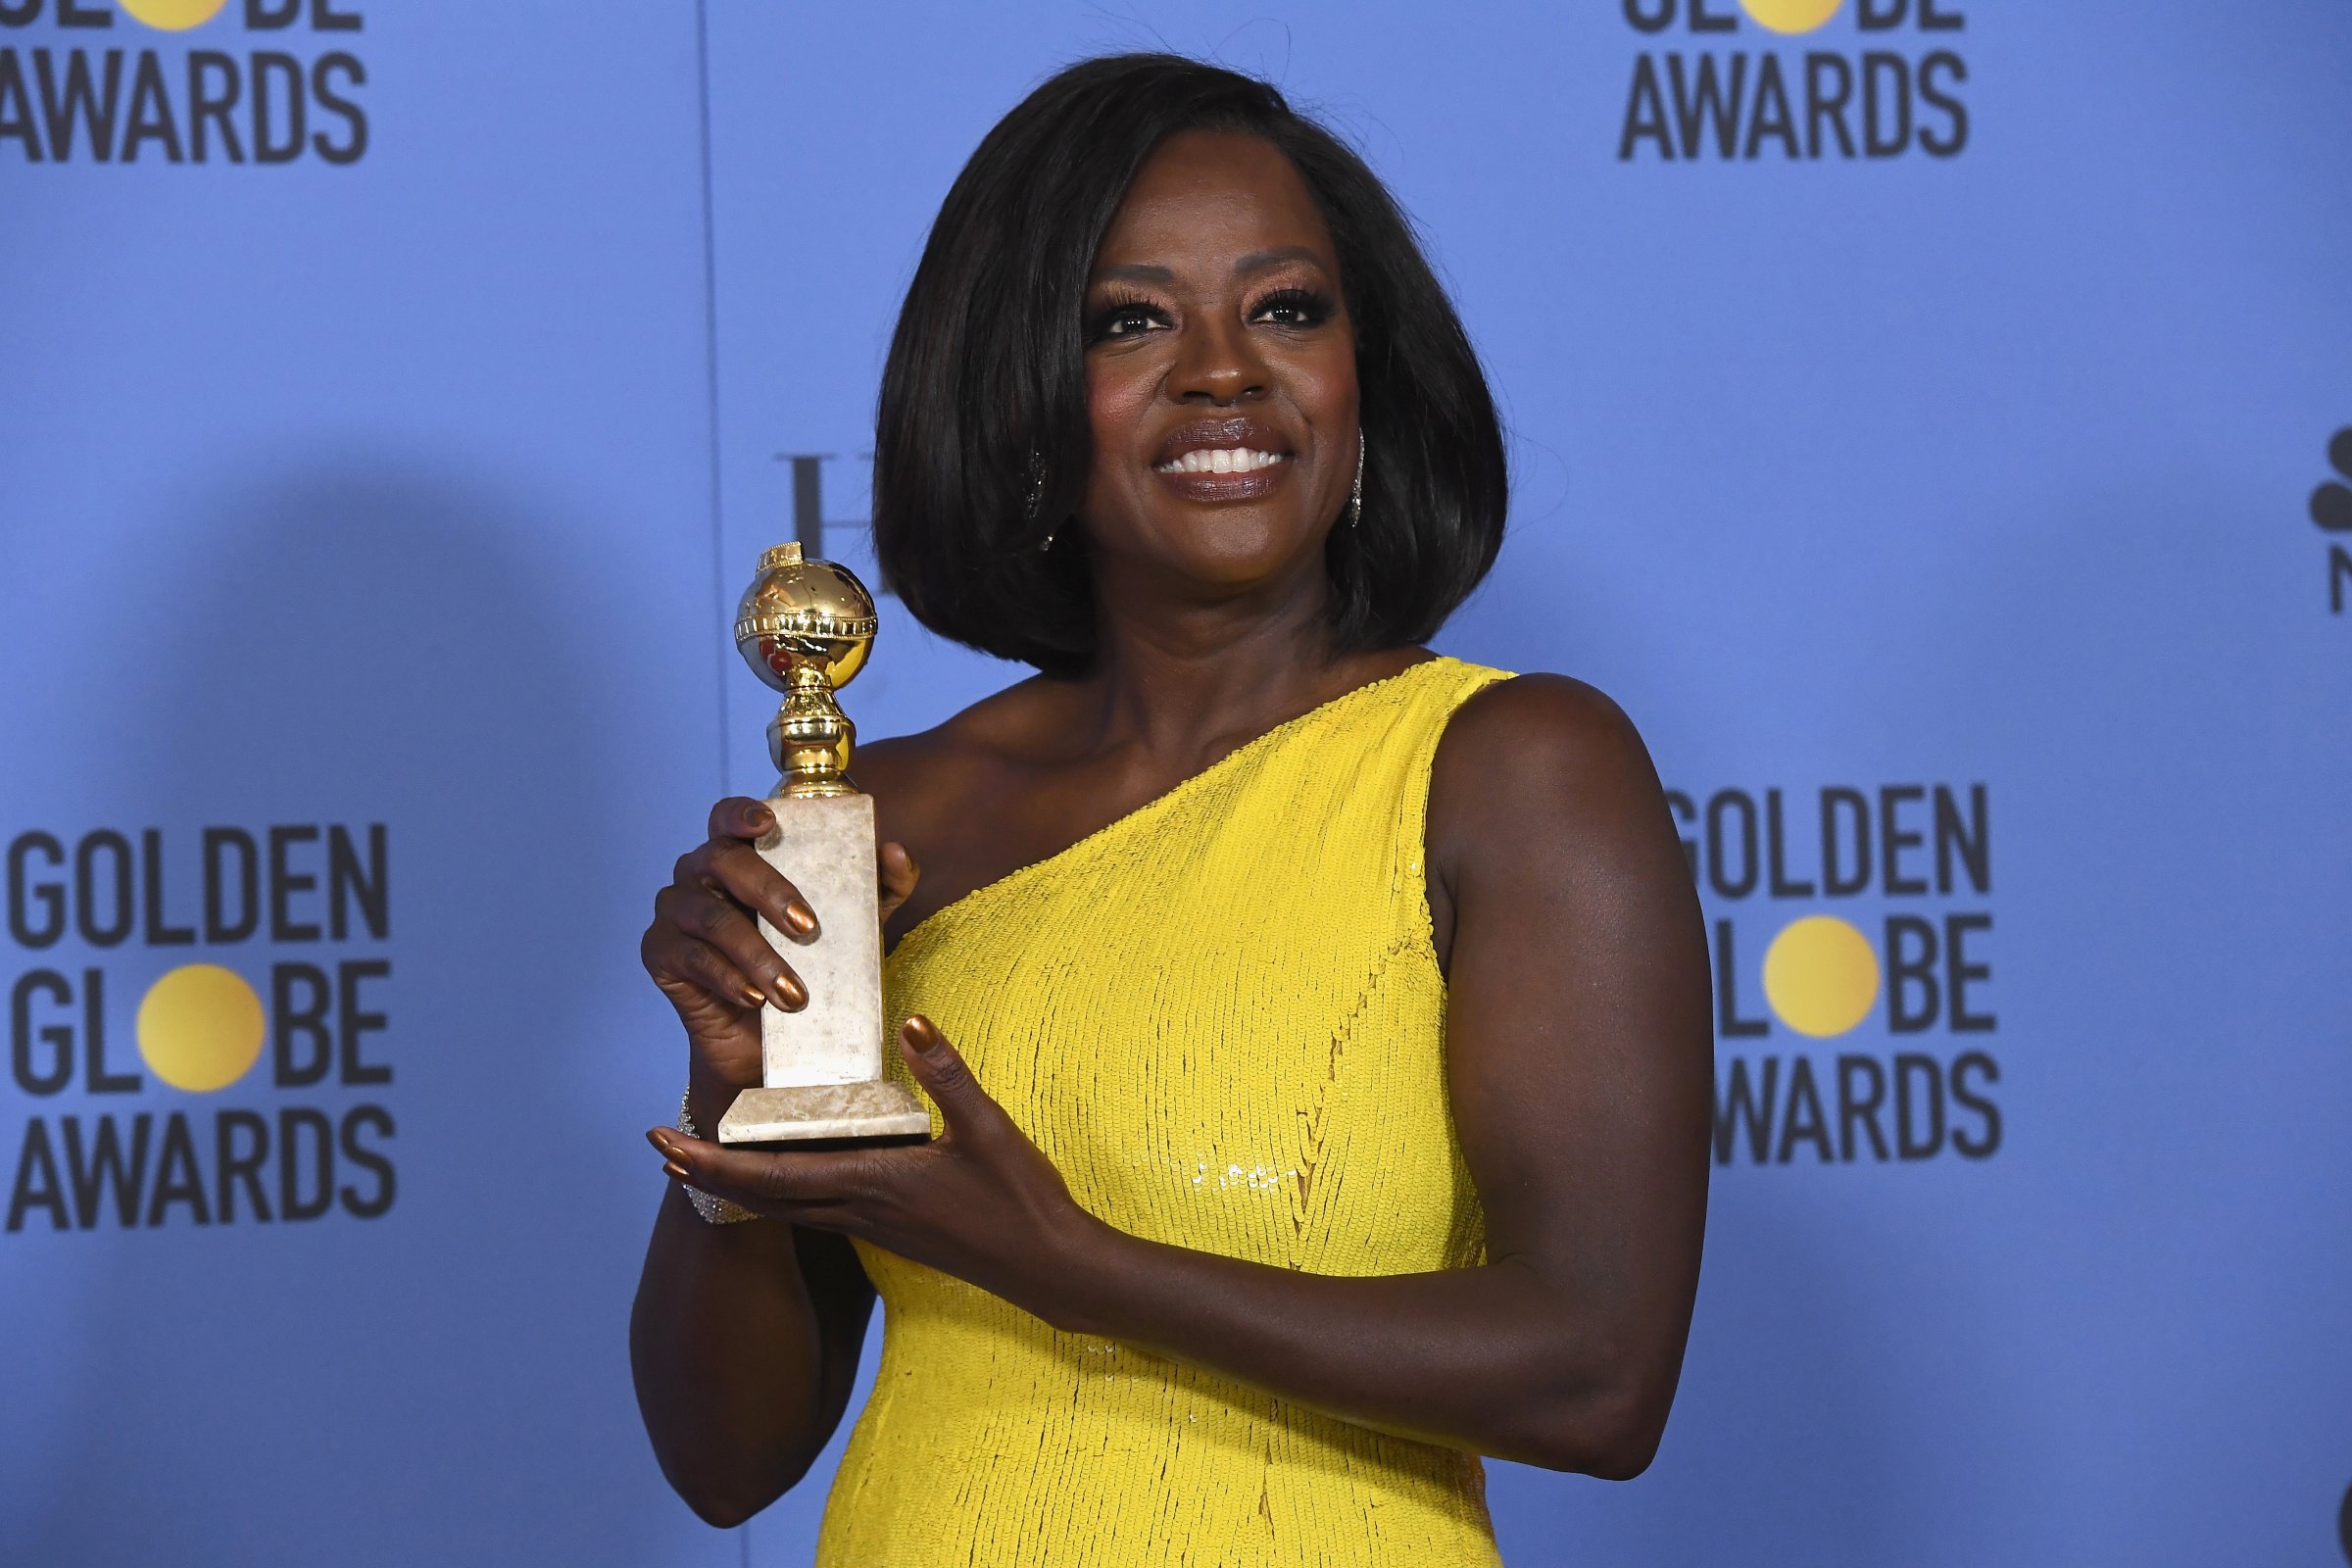 74th ANNUAL GOLDEN GLOBE AWARDS -- Pictured: (l-r) Actress Viola Davis, winner of the Best Performance by an Actress in a Supporting Role in Any Motion Picture for 'Fences', posesin the press room at the 74th Annual Golden Globe Awards held at the Beverly Hilton Hotel on January 8, 2017.